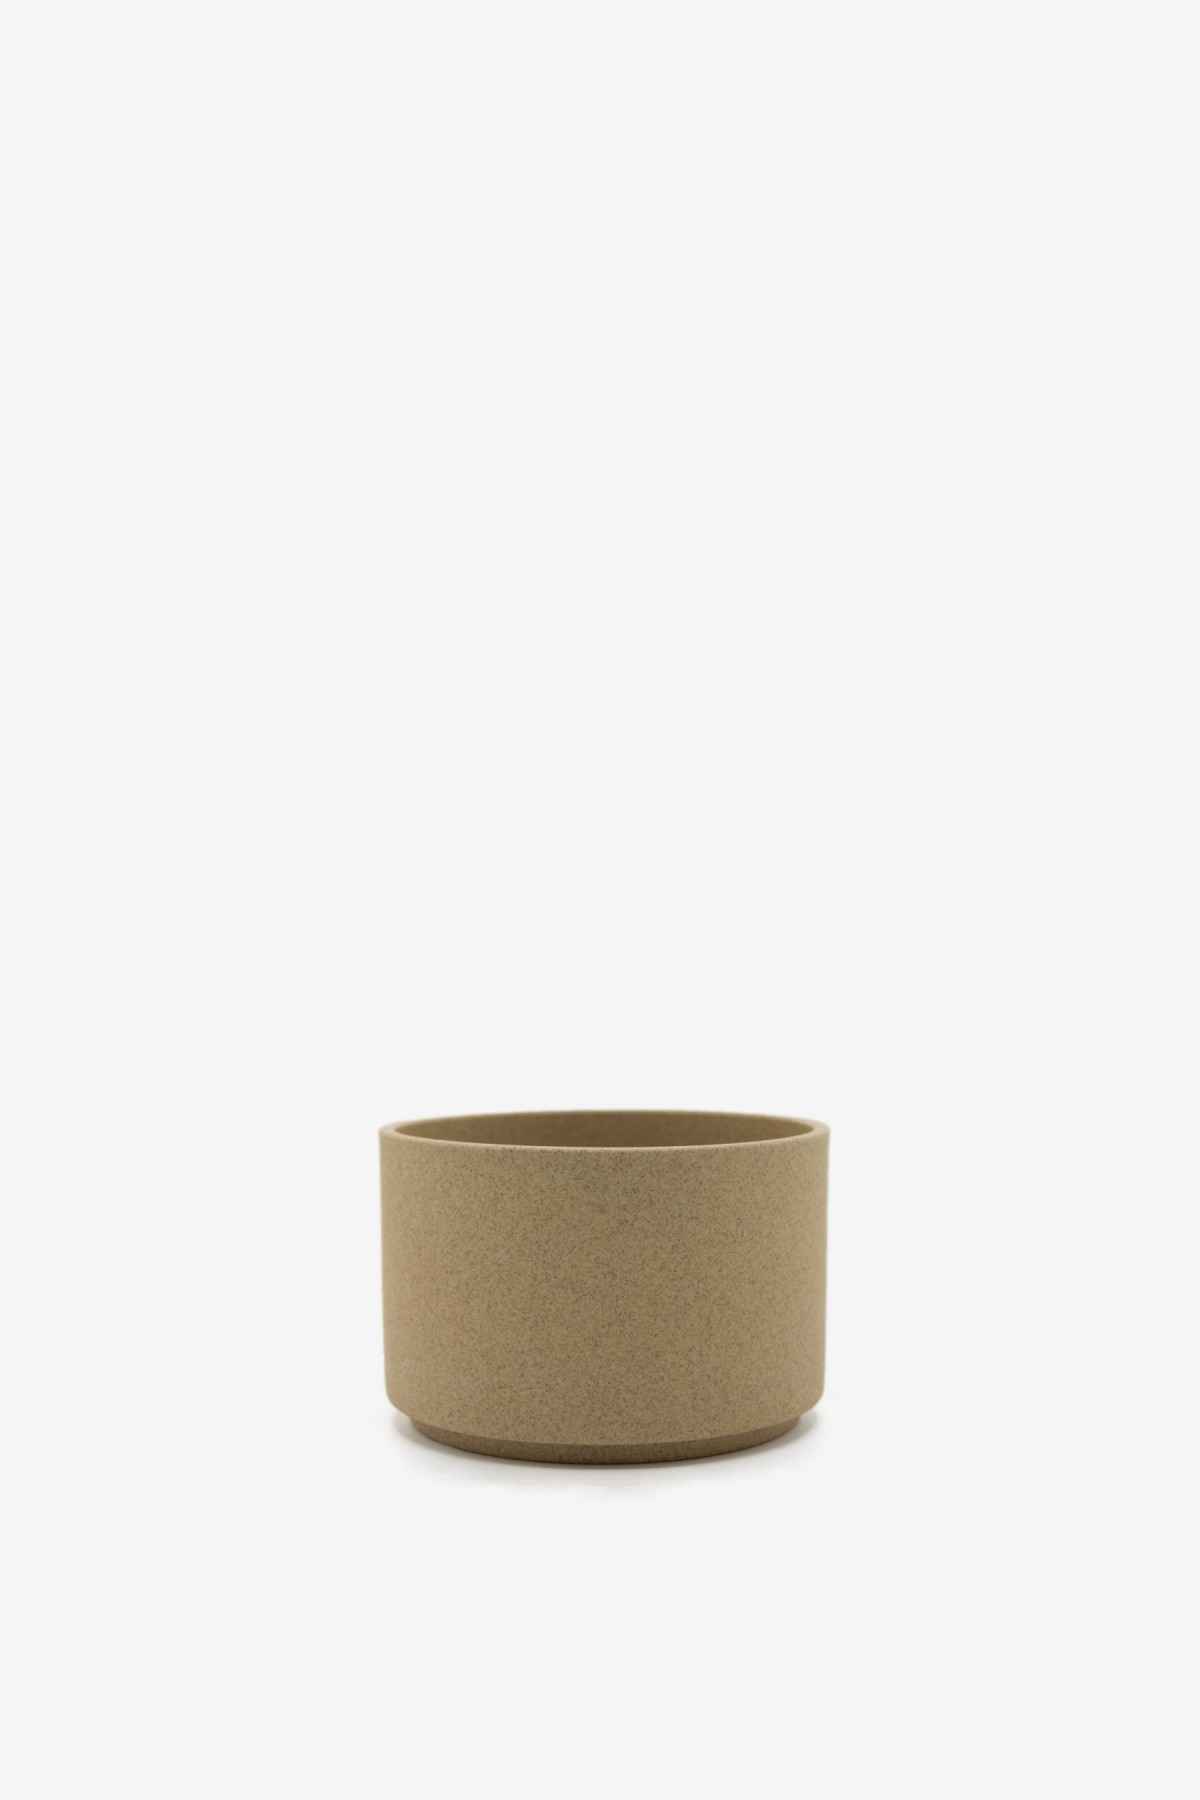 Hasami Porcelain Cup Small in Sand